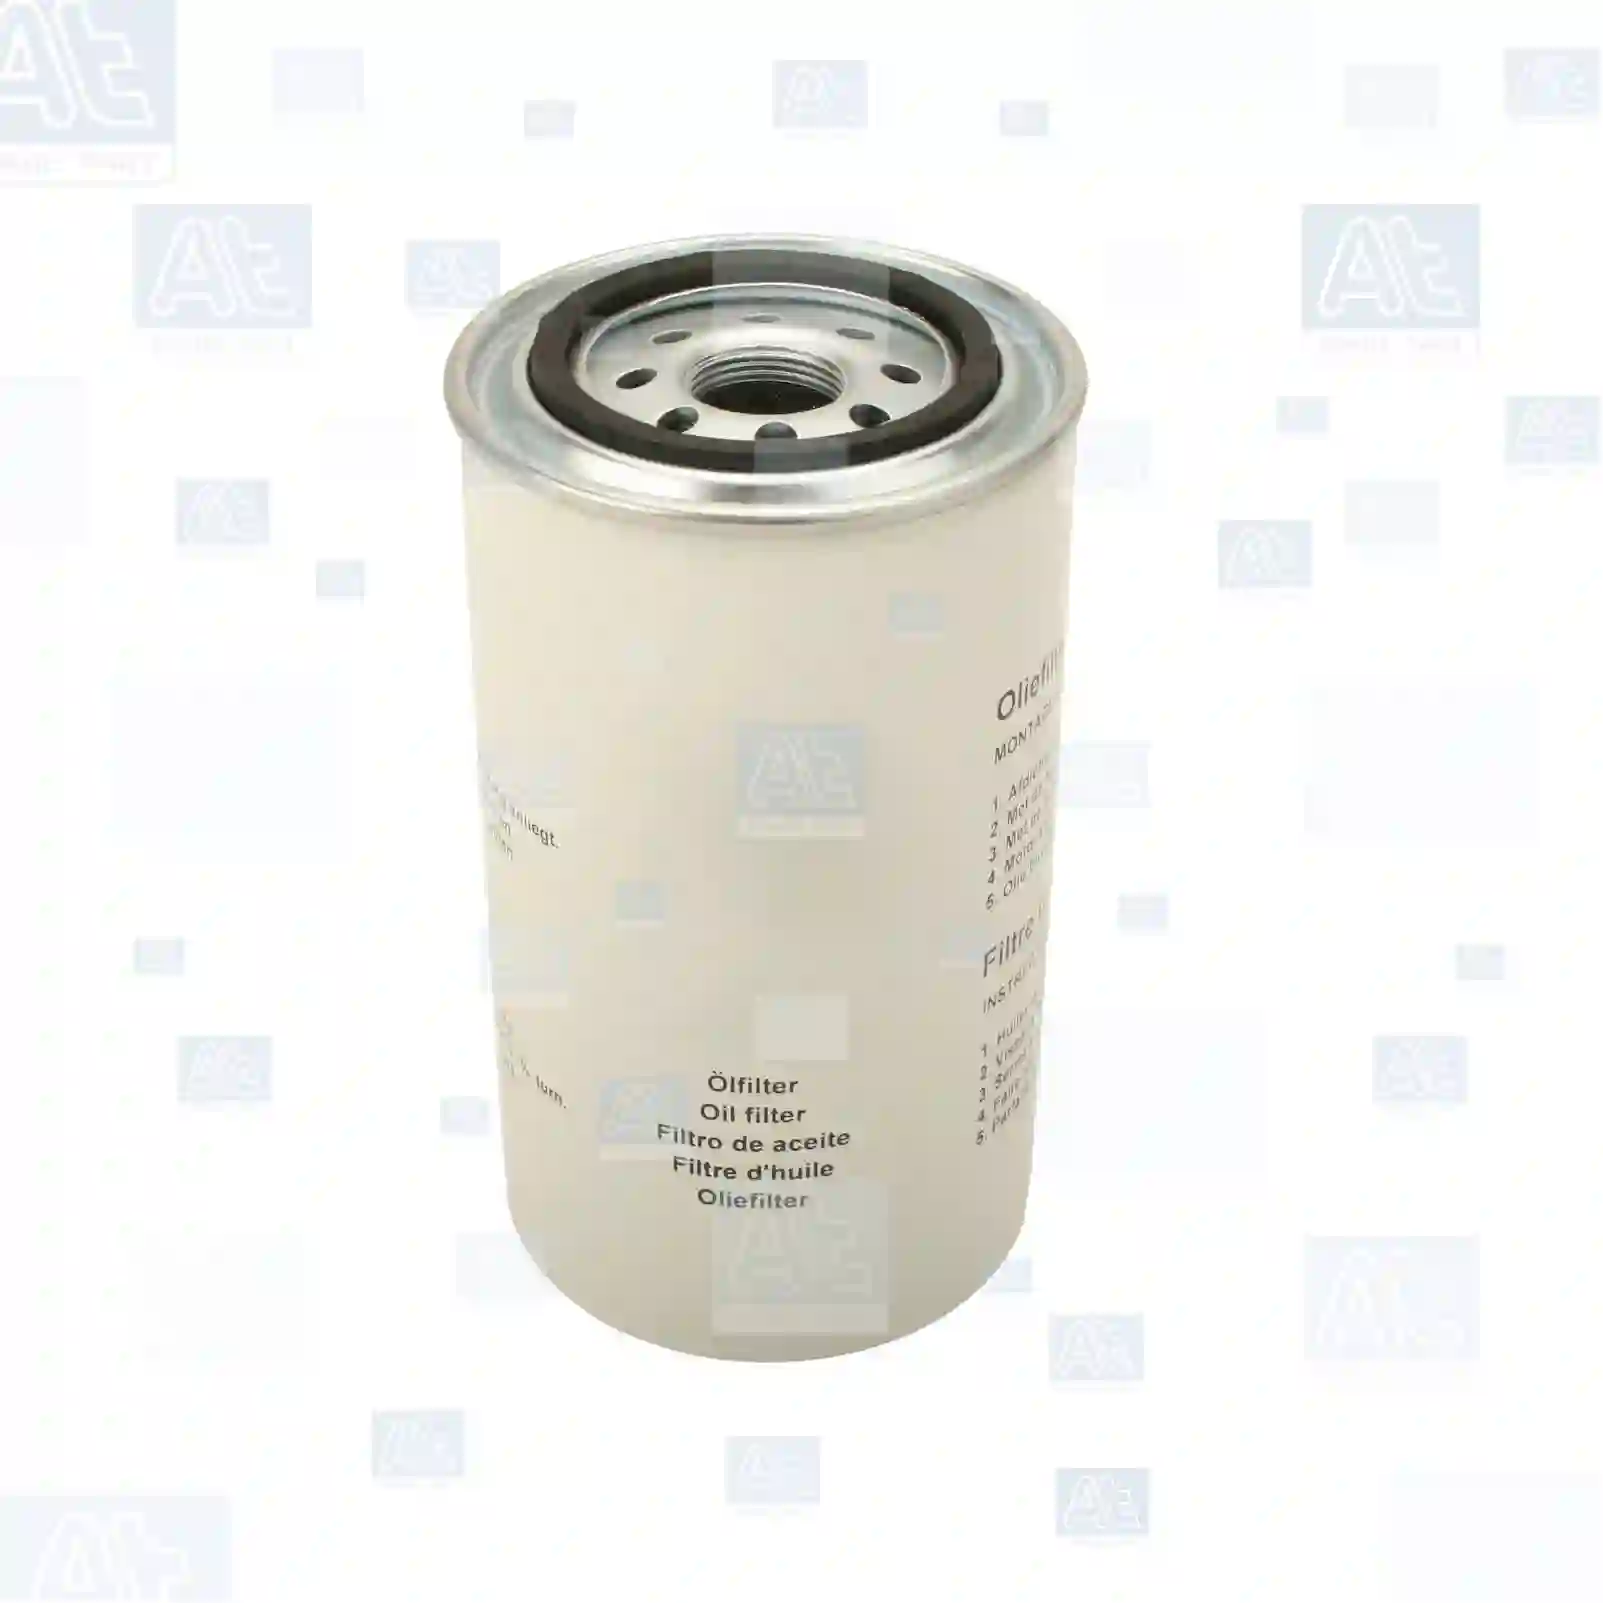 Oil filter, 77701055, 72516556, 1240388H1, 47368538, J903264, J908615, J932217, J934430, J937345, J937743, J937743MP, 3I-1376, 3903269, 4429395, 4429615, 4746914, 4761277, 5011844M, 5016547AA, 5016547AB, 5016547AC, 508325AA, 5083285AA, 5093092AA, 3155618, 3890708, 3890710, 3903264, 3908315, 3908615, 3914395, 3932217, 3934430, 3937695, 3937743, 47100093, 65055105021B, 65055105028A, 991290710, 490196, CBU1124, CBU2676, 3937743, 5016547AA, 5016547AC, 1012N010, 2011078, 151831112, 76192087, Y03753603, DNP558615, 9414101712, 3908615, 1240388H1, J903264, J908615, J932217, 02/910970, 0531012005, 3908615, CBU1124, 2191P558615, 1072417M1, J934430, 0J937743, 47368538, 1870014, J908615, LUS8615, 278618139902, 3908615, 0704970123, 81035900, 15155622, 36844, 85114086, 991208615, 991290710 ||  77701055 At Spare Part | Engine, Accelerator Pedal, Camshaft, Connecting Rod, Crankcase, Crankshaft, Cylinder Head, Engine Suspension Mountings, Exhaust Manifold, Exhaust Gas Recirculation, Filter Kits, Flywheel Housing, General Overhaul Kits, Engine, Intake Manifold, Oil Cleaner, Oil Cooler, Oil Filter, Oil Pump, Oil Sump, Piston & Liner, Sensor & Switch, Timing Case, Turbocharger, Cooling System, Belt Tensioner, Coolant Filter, Coolant Pipe, Corrosion Prevention Agent, Drive, Expansion Tank, Fan, Intercooler, Monitors & Gauges, Radiator, Thermostat, V-Belt / Timing belt, Water Pump, Fuel System, Electronical Injector Unit, Feed Pump, Fuel Filter, cpl., Fuel Gauge Sender,  Fuel Line, Fuel Pump, Fuel Tank, Injection Line Kit, Injection Pump, Exhaust System, Clutch & Pedal, Gearbox, Propeller Shaft, Axles, Brake System, Hubs & Wheels, Suspension, Leaf Spring, Universal Parts / Accessories, Steering, Electrical System, Cabin Oil filter, 77701055, 72516556, 1240388H1, 47368538, J903264, J908615, J932217, J934430, J937345, J937743, J937743MP, 3I-1376, 3903269, 4429395, 4429615, 4746914, 4761277, 5011844M, 5016547AA, 5016547AB, 5016547AC, 508325AA, 5083285AA, 5093092AA, 3155618, 3890708, 3890710, 3903264, 3908315, 3908615, 3914395, 3932217, 3934430, 3937695, 3937743, 47100093, 65055105021B, 65055105028A, 991290710, 490196, CBU1124, CBU2676, 3937743, 5016547AA, 5016547AC, 1012N010, 2011078, 151831112, 76192087, Y03753603, DNP558615, 9414101712, 3908615, 1240388H1, J903264, J908615, J932217, 02/910970, 0531012005, 3908615, CBU1124, 2191P558615, 1072417M1, J934430, 0J937743, 47368538, 1870014, J908615, LUS8615, 278618139902, 3908615, 0704970123, 81035900, 15155622, 36844, 85114086, 991208615, 991290710 ||  77701055 At Spare Part | Engine, Accelerator Pedal, Camshaft, Connecting Rod, Crankcase, Crankshaft, Cylinder Head, Engine Suspension Mountings, Exhaust Manifold, Exhaust Gas Recirculation, Filter Kits, Flywheel Housing, General Overhaul Kits, Engine, Intake Manifold, Oil Cleaner, Oil Cooler, Oil Filter, Oil Pump, Oil Sump, Piston & Liner, Sensor & Switch, Timing Case, Turbocharger, Cooling System, Belt Tensioner, Coolant Filter, Coolant Pipe, Corrosion Prevention Agent, Drive, Expansion Tank, Fan, Intercooler, Monitors & Gauges, Radiator, Thermostat, V-Belt / Timing belt, Water Pump, Fuel System, Electronical Injector Unit, Feed Pump, Fuel Filter, cpl., Fuel Gauge Sender,  Fuel Line, Fuel Pump, Fuel Tank, Injection Line Kit, Injection Pump, Exhaust System, Clutch & Pedal, Gearbox, Propeller Shaft, Axles, Brake System, Hubs & Wheels, Suspension, Leaf Spring, Universal Parts / Accessories, Steering, Electrical System, Cabin